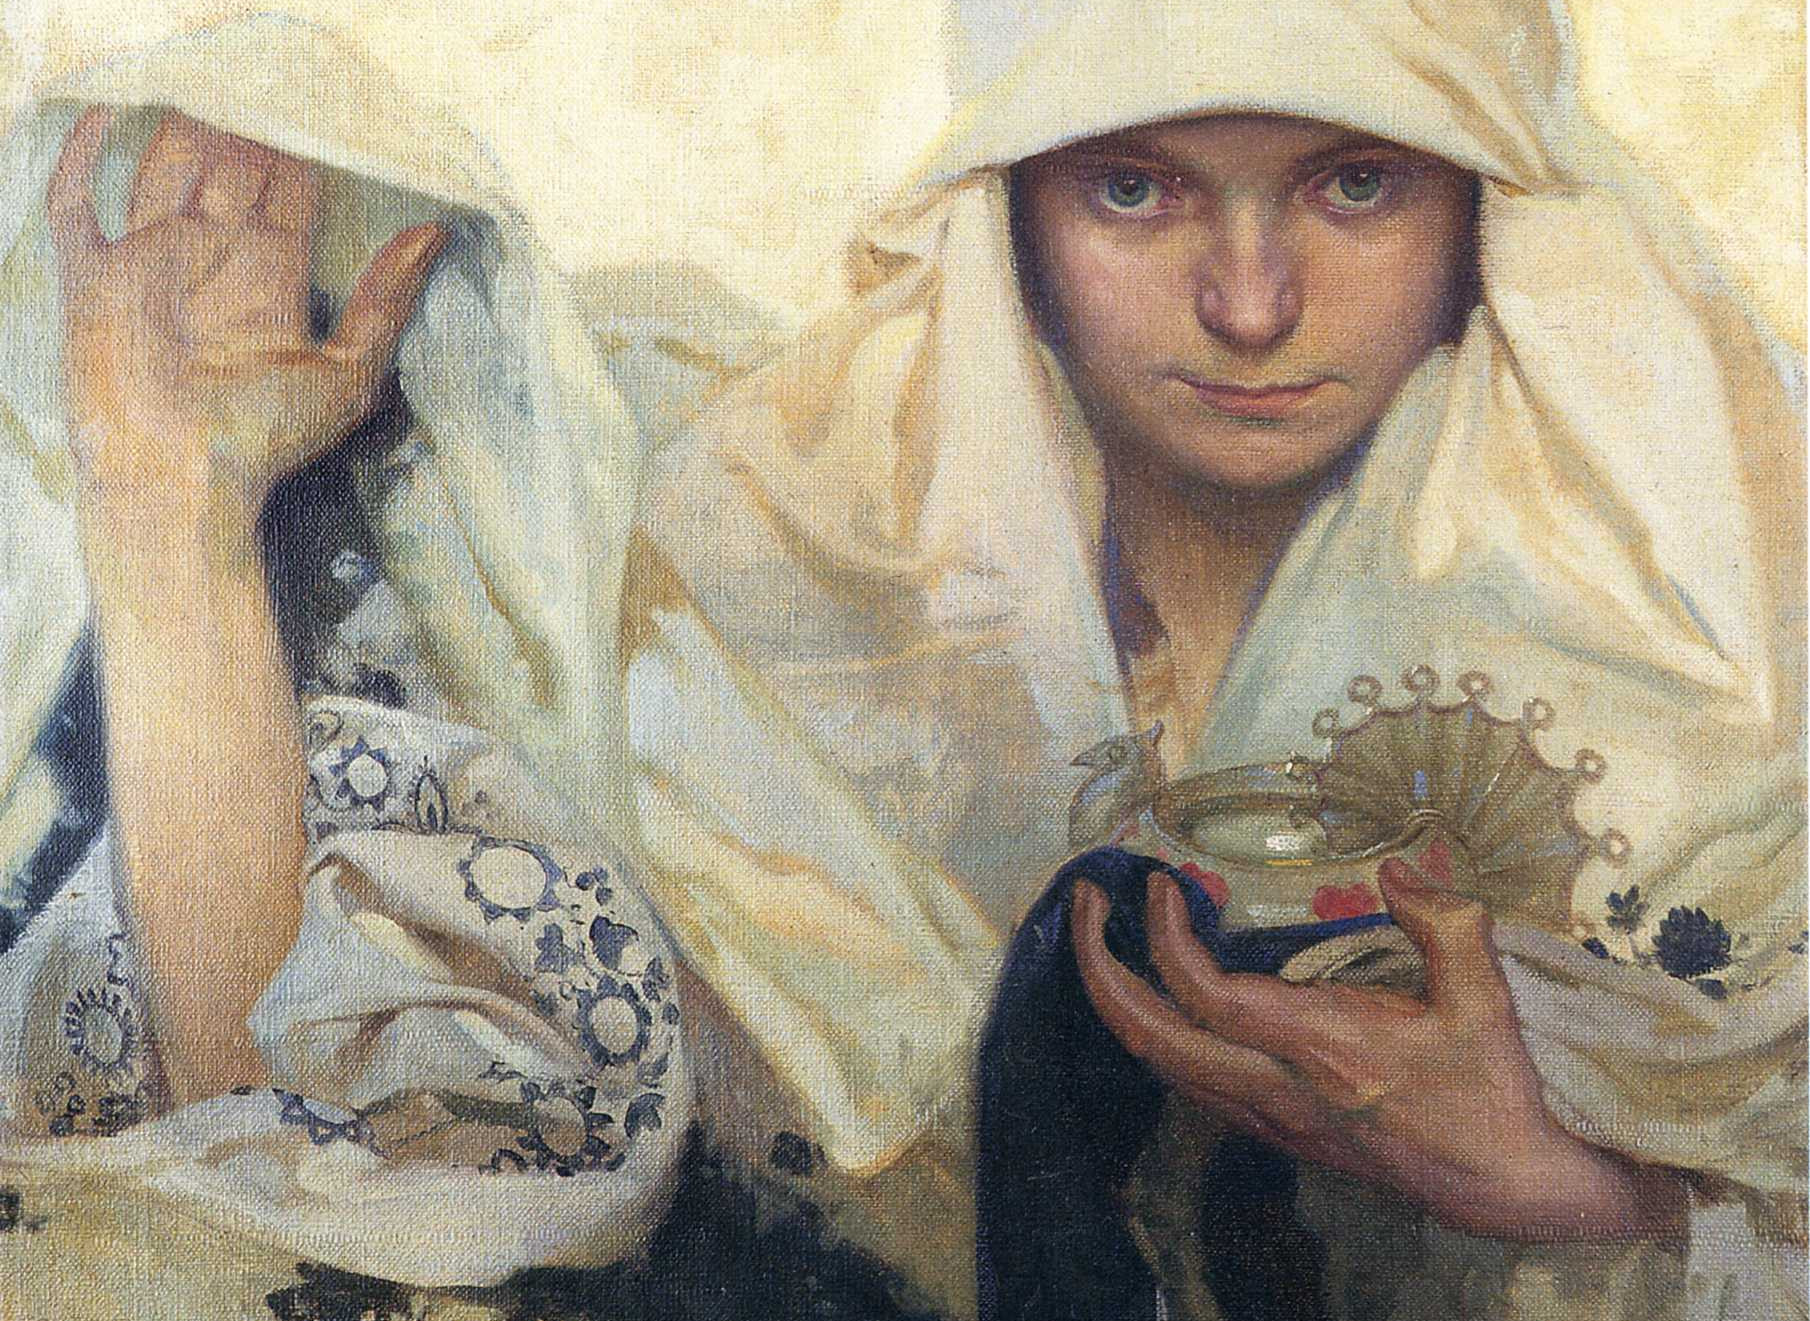 An oil painting titled 'Fate', painted in 1920 by Alphonse Mucha. It depicts a woman in a white robe holding an oil lamp. 